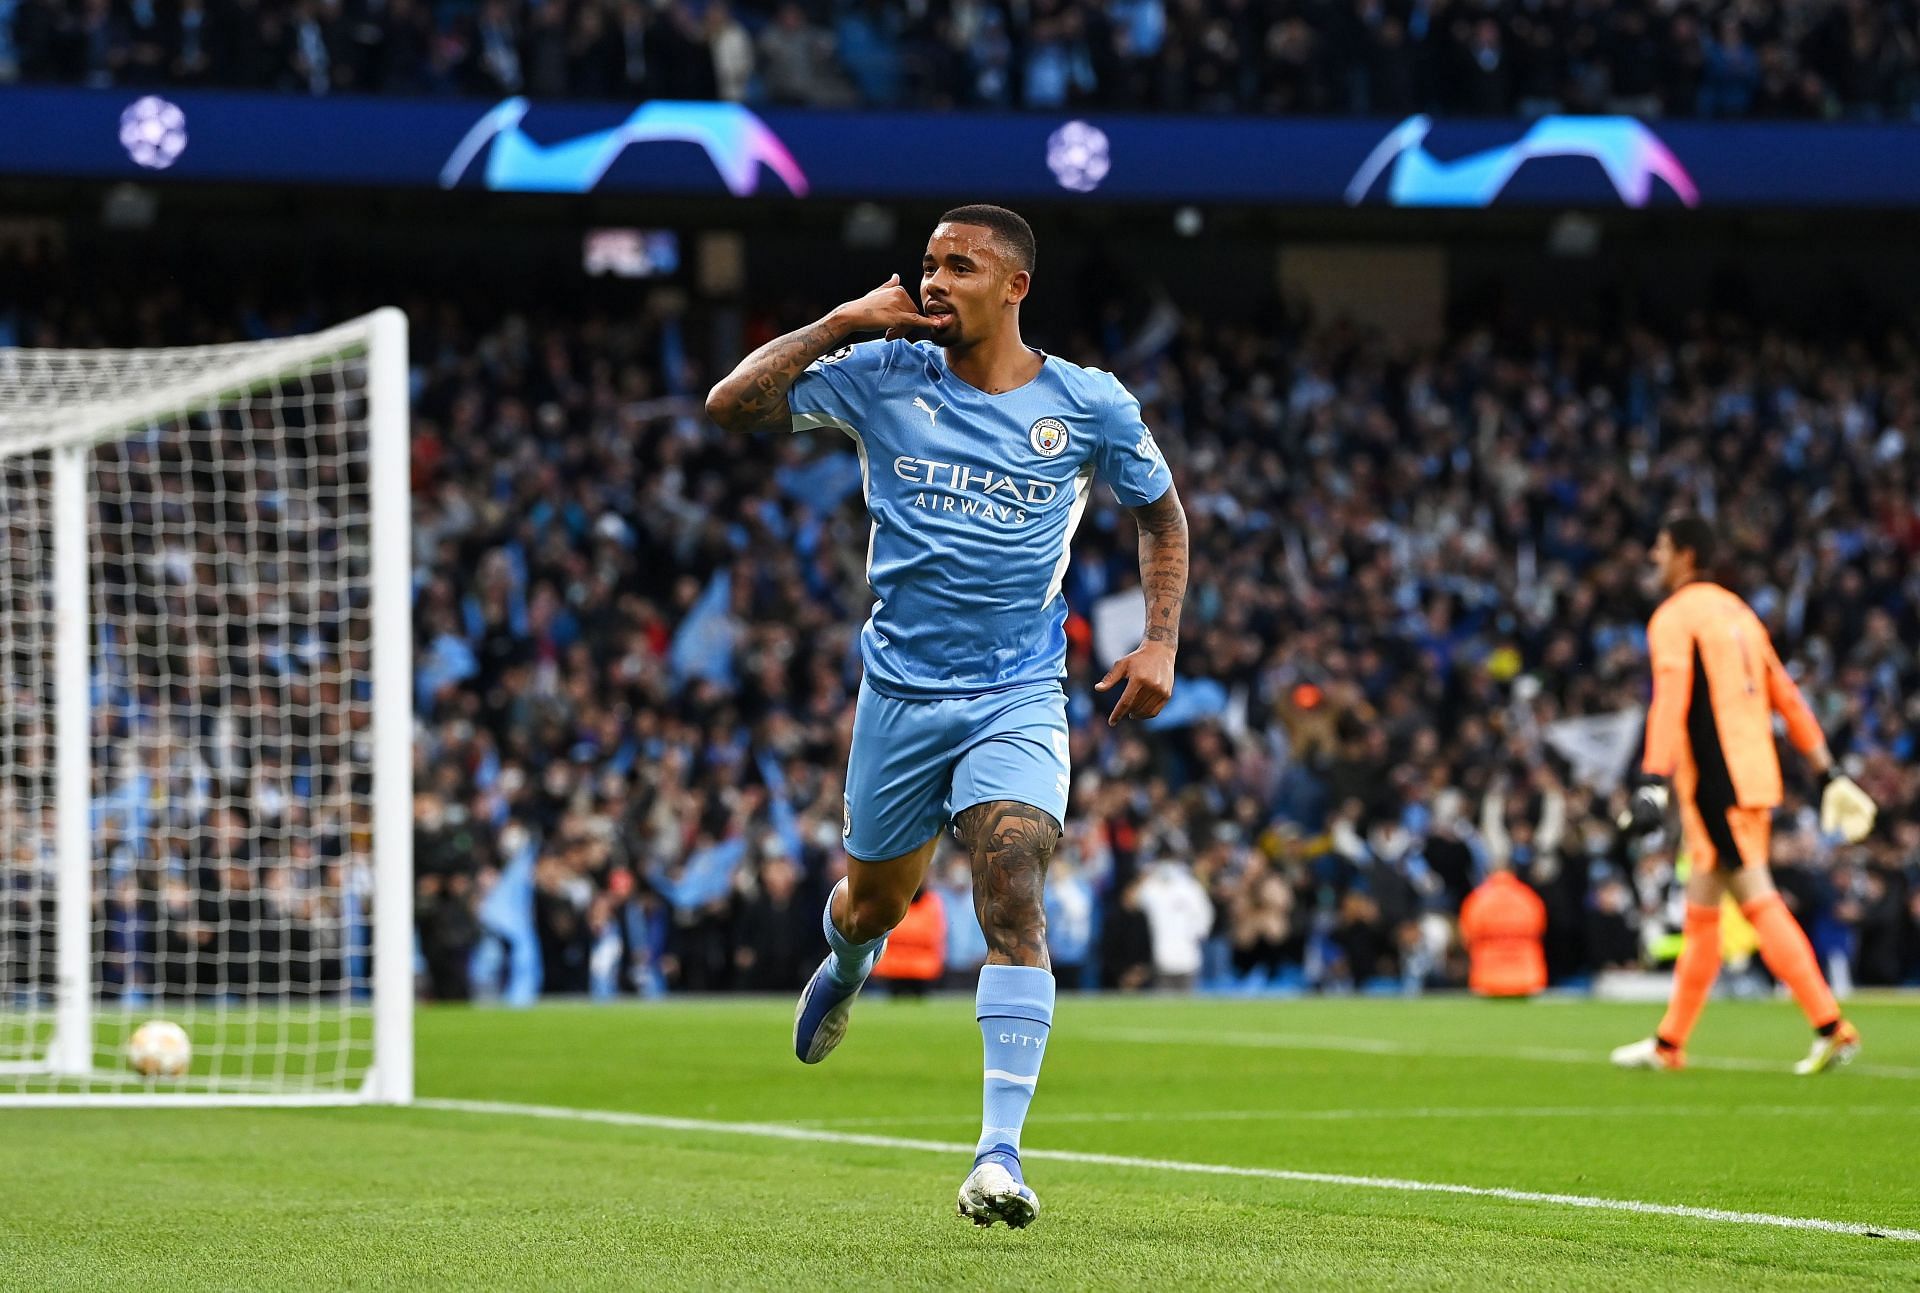 Gabriel Jesus was a dependable player for Pep Guardiola at Manchester City before moving this summer.